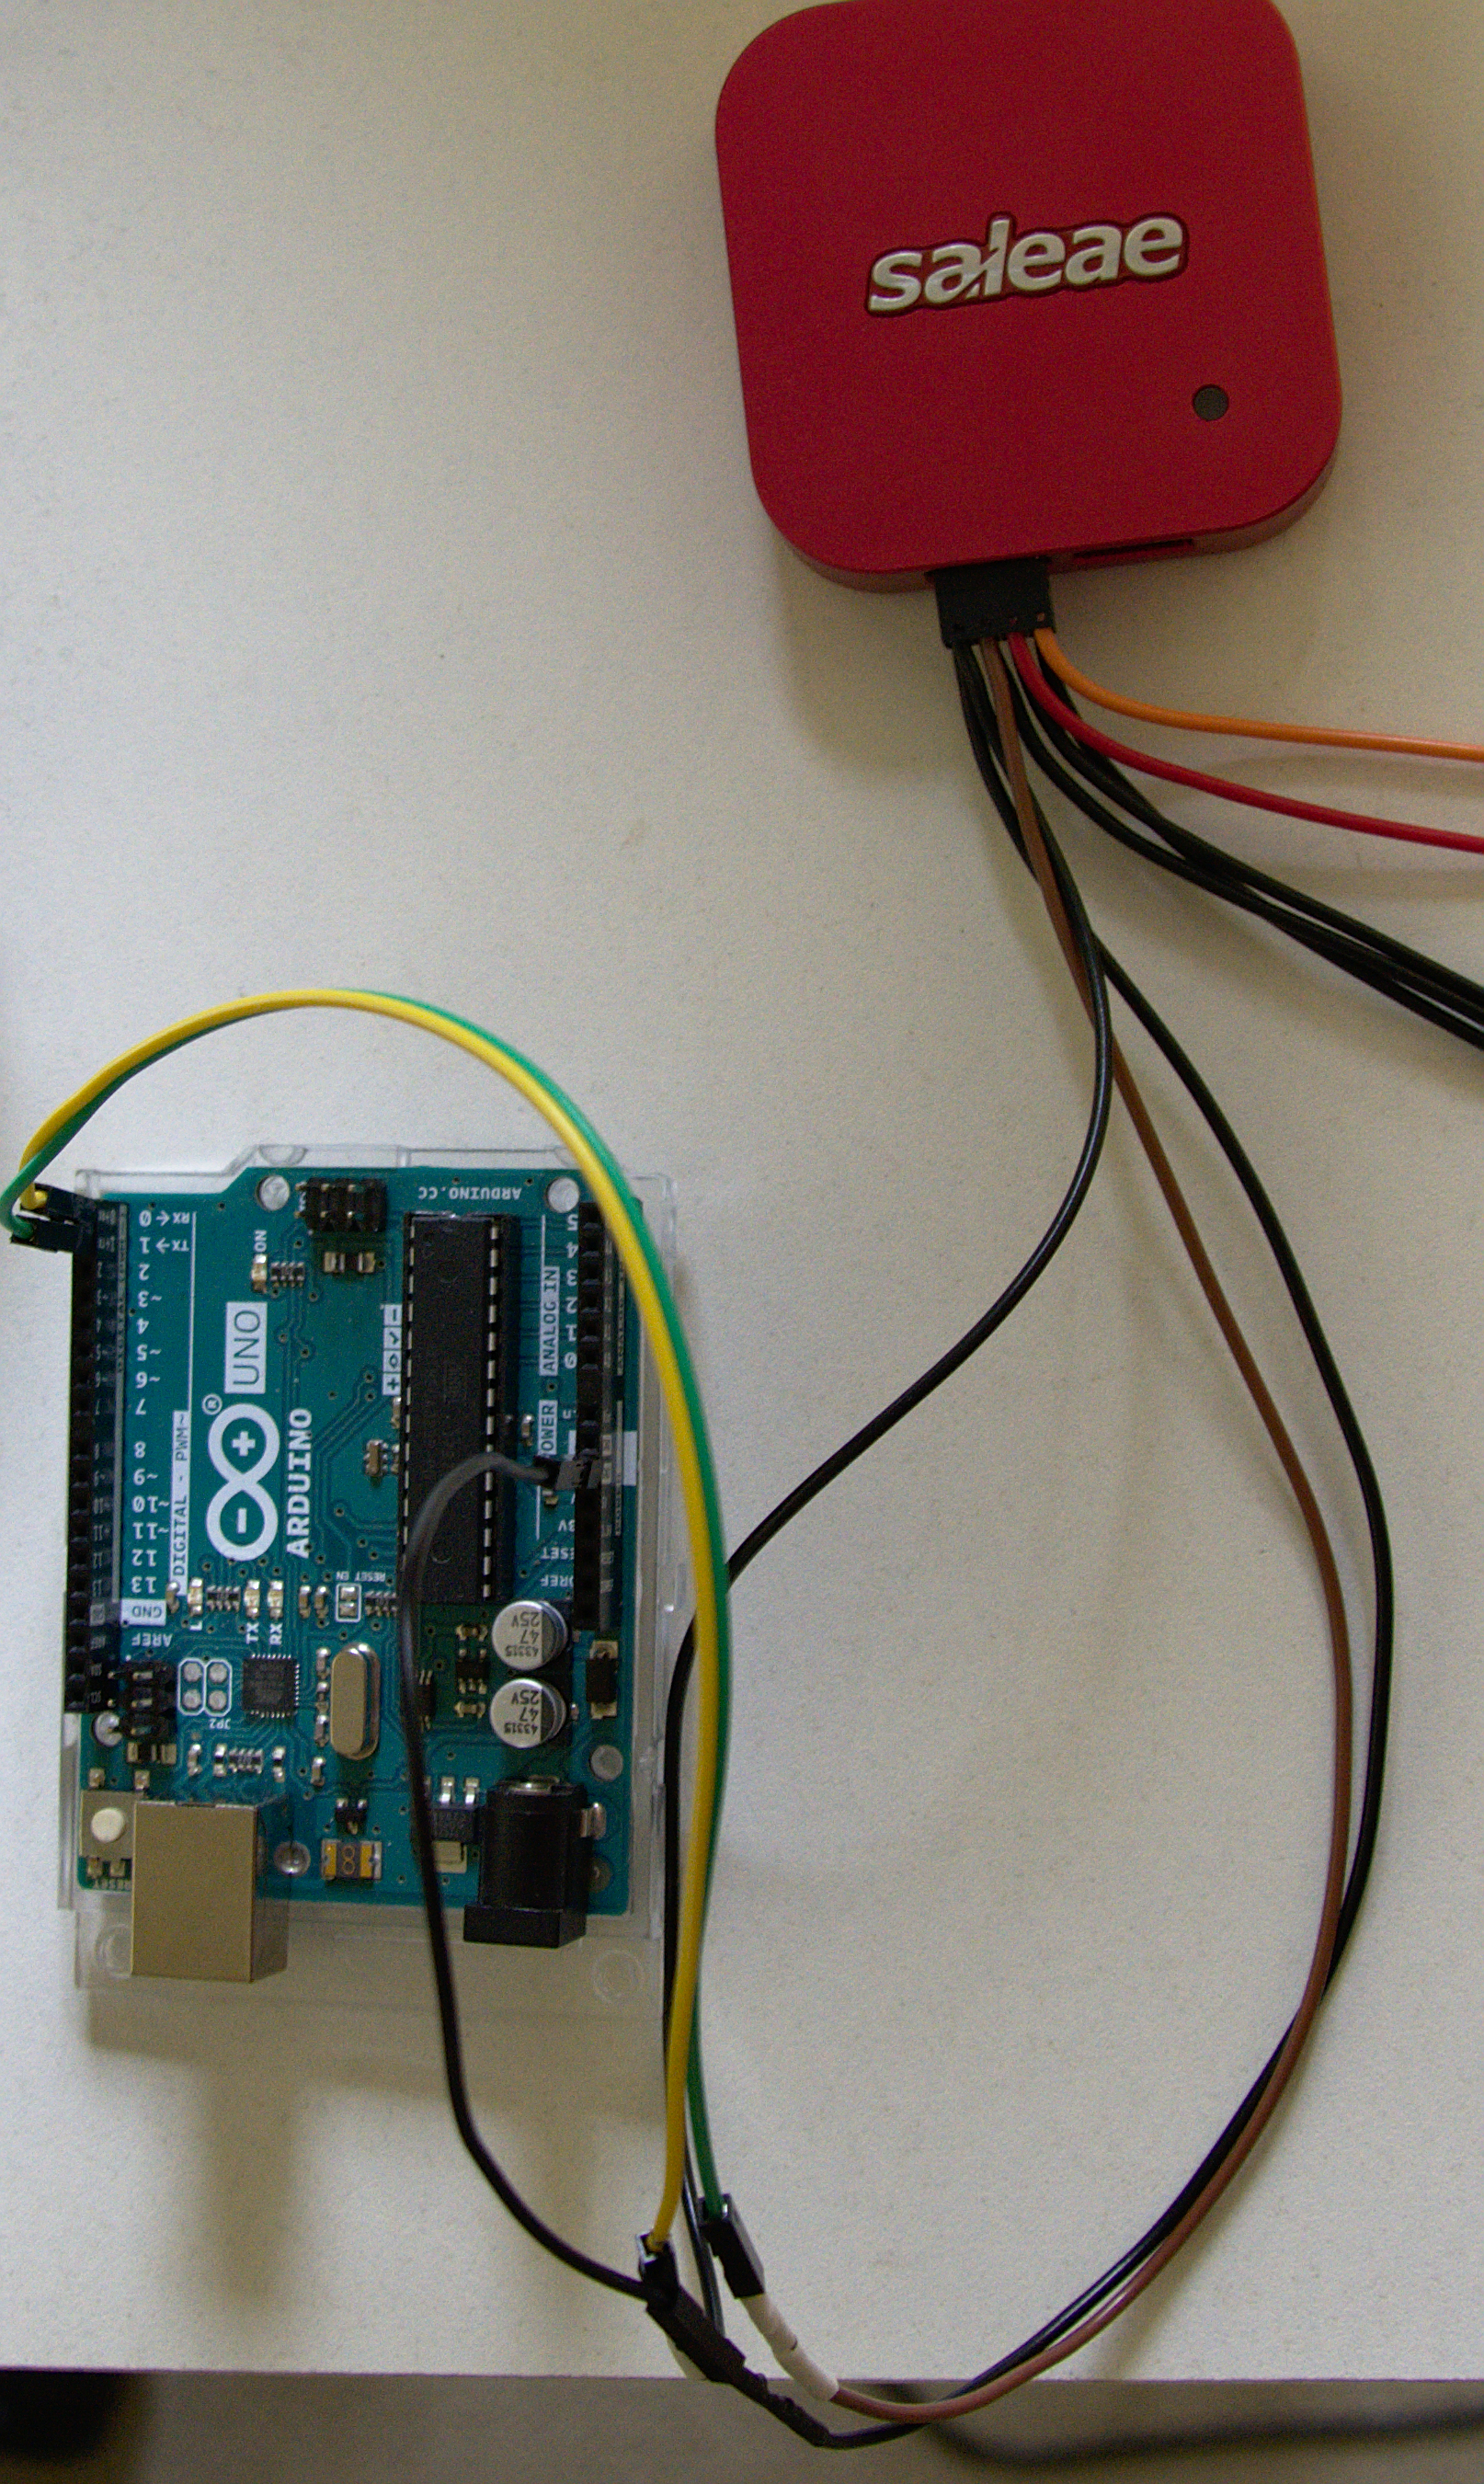 Logic analyser connected to the Arduino board